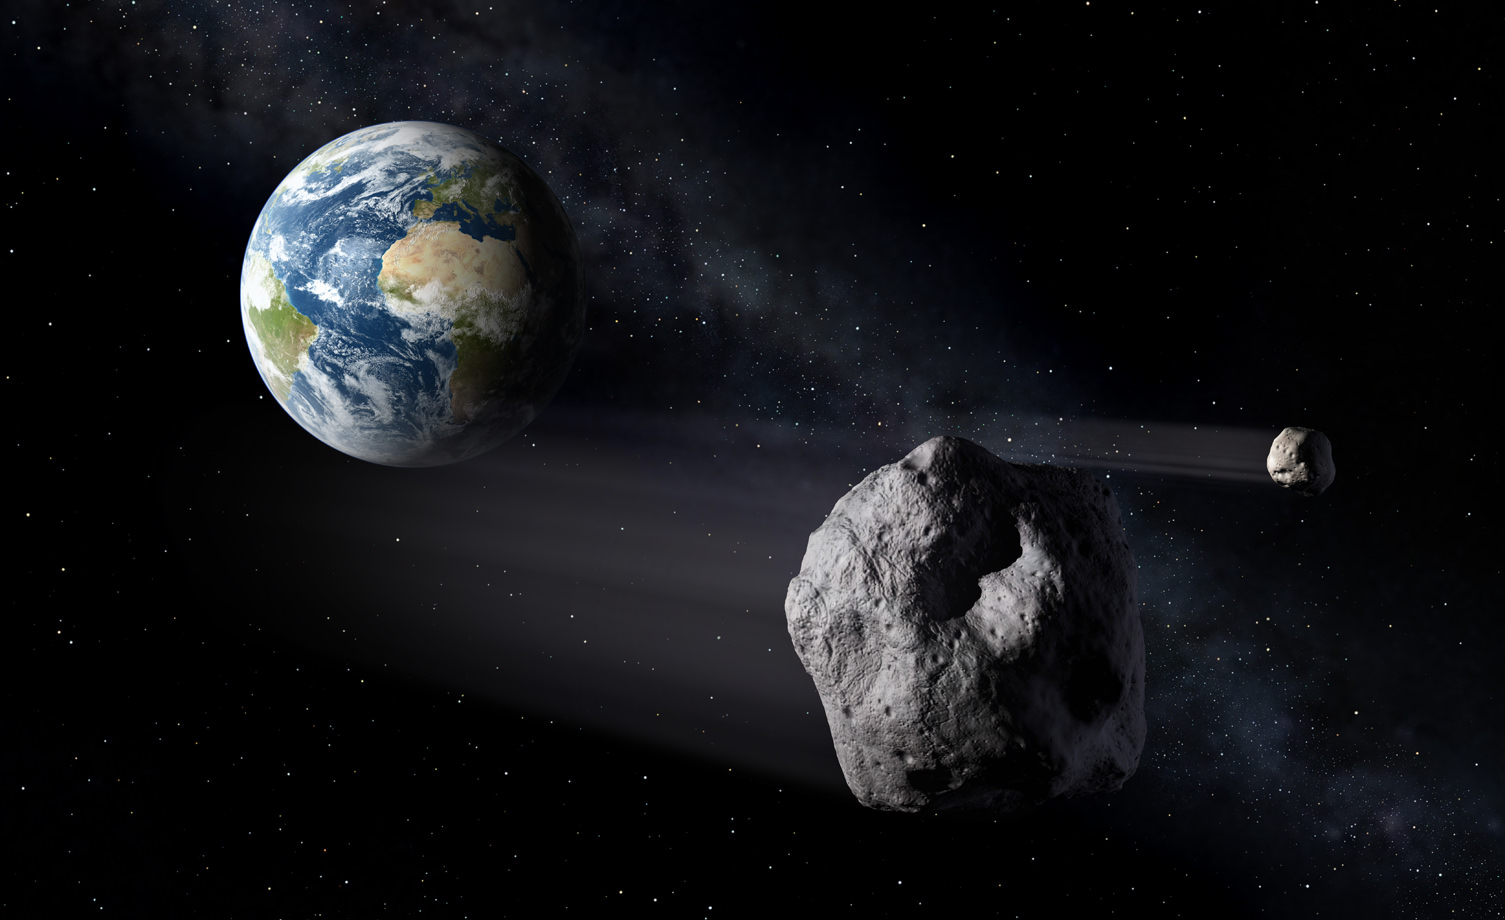 Artist's impression of a Near-Earth Asteroid passing by Earth. Credit: ESA